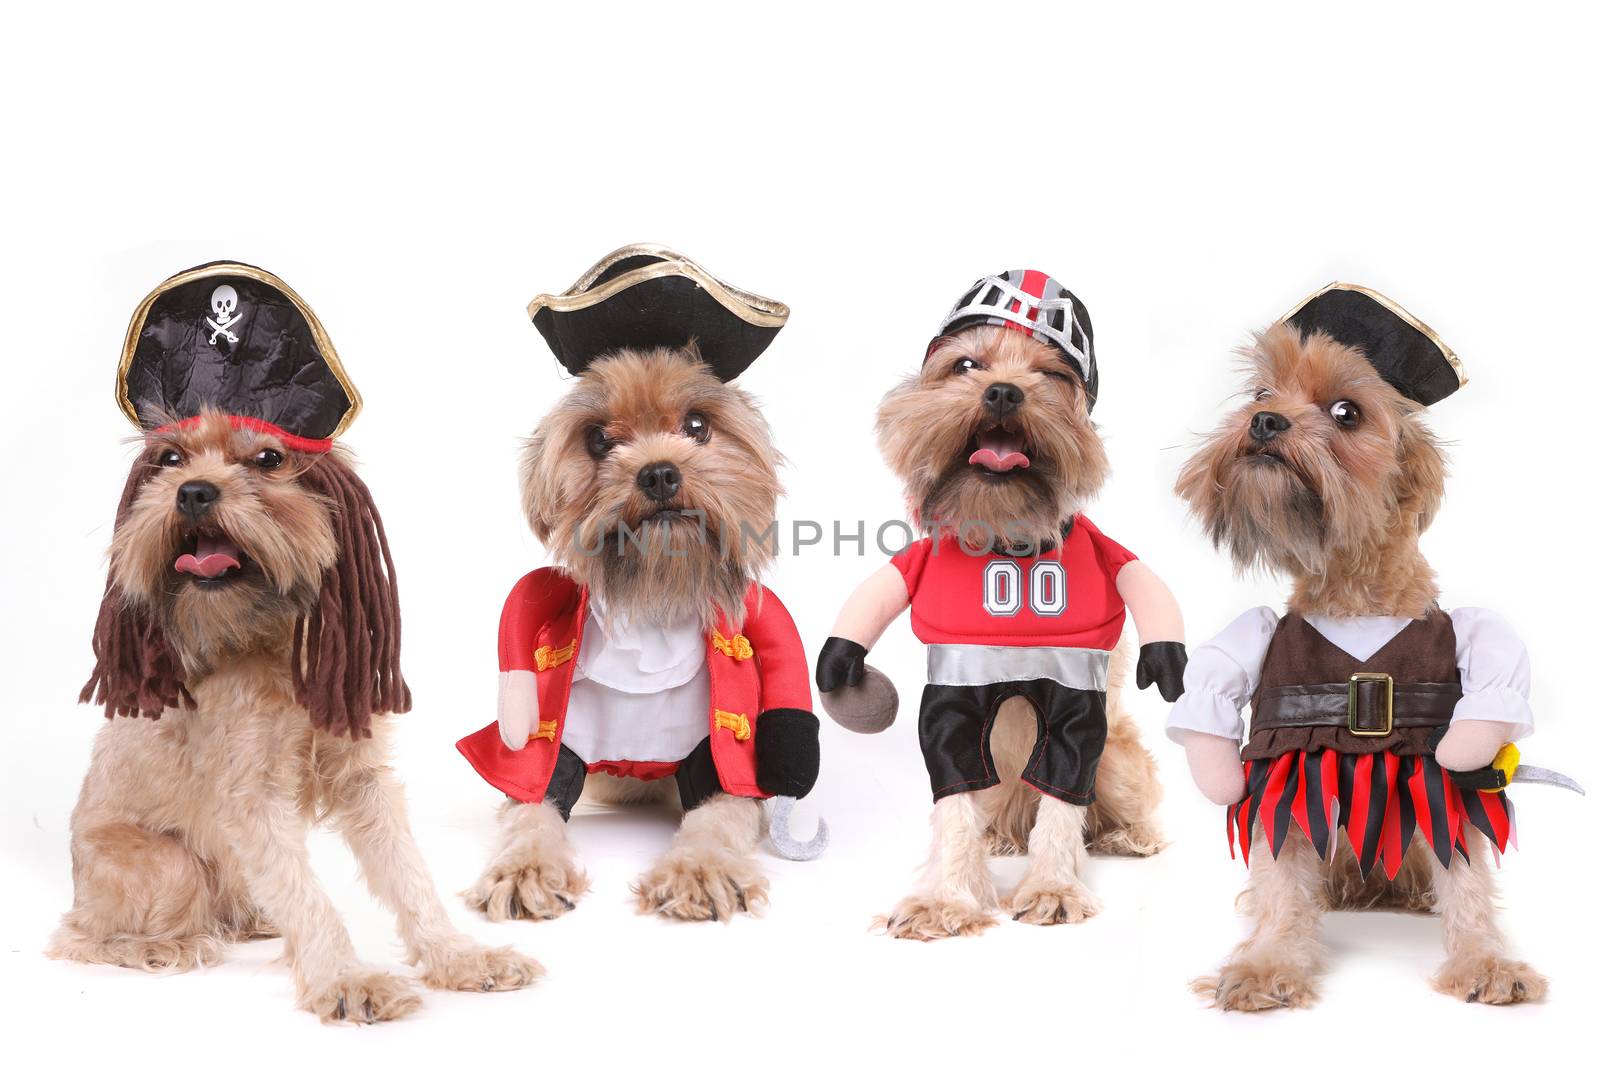 Funny Multiple Dogs in Pirate and Football Costumes by tobkatrina